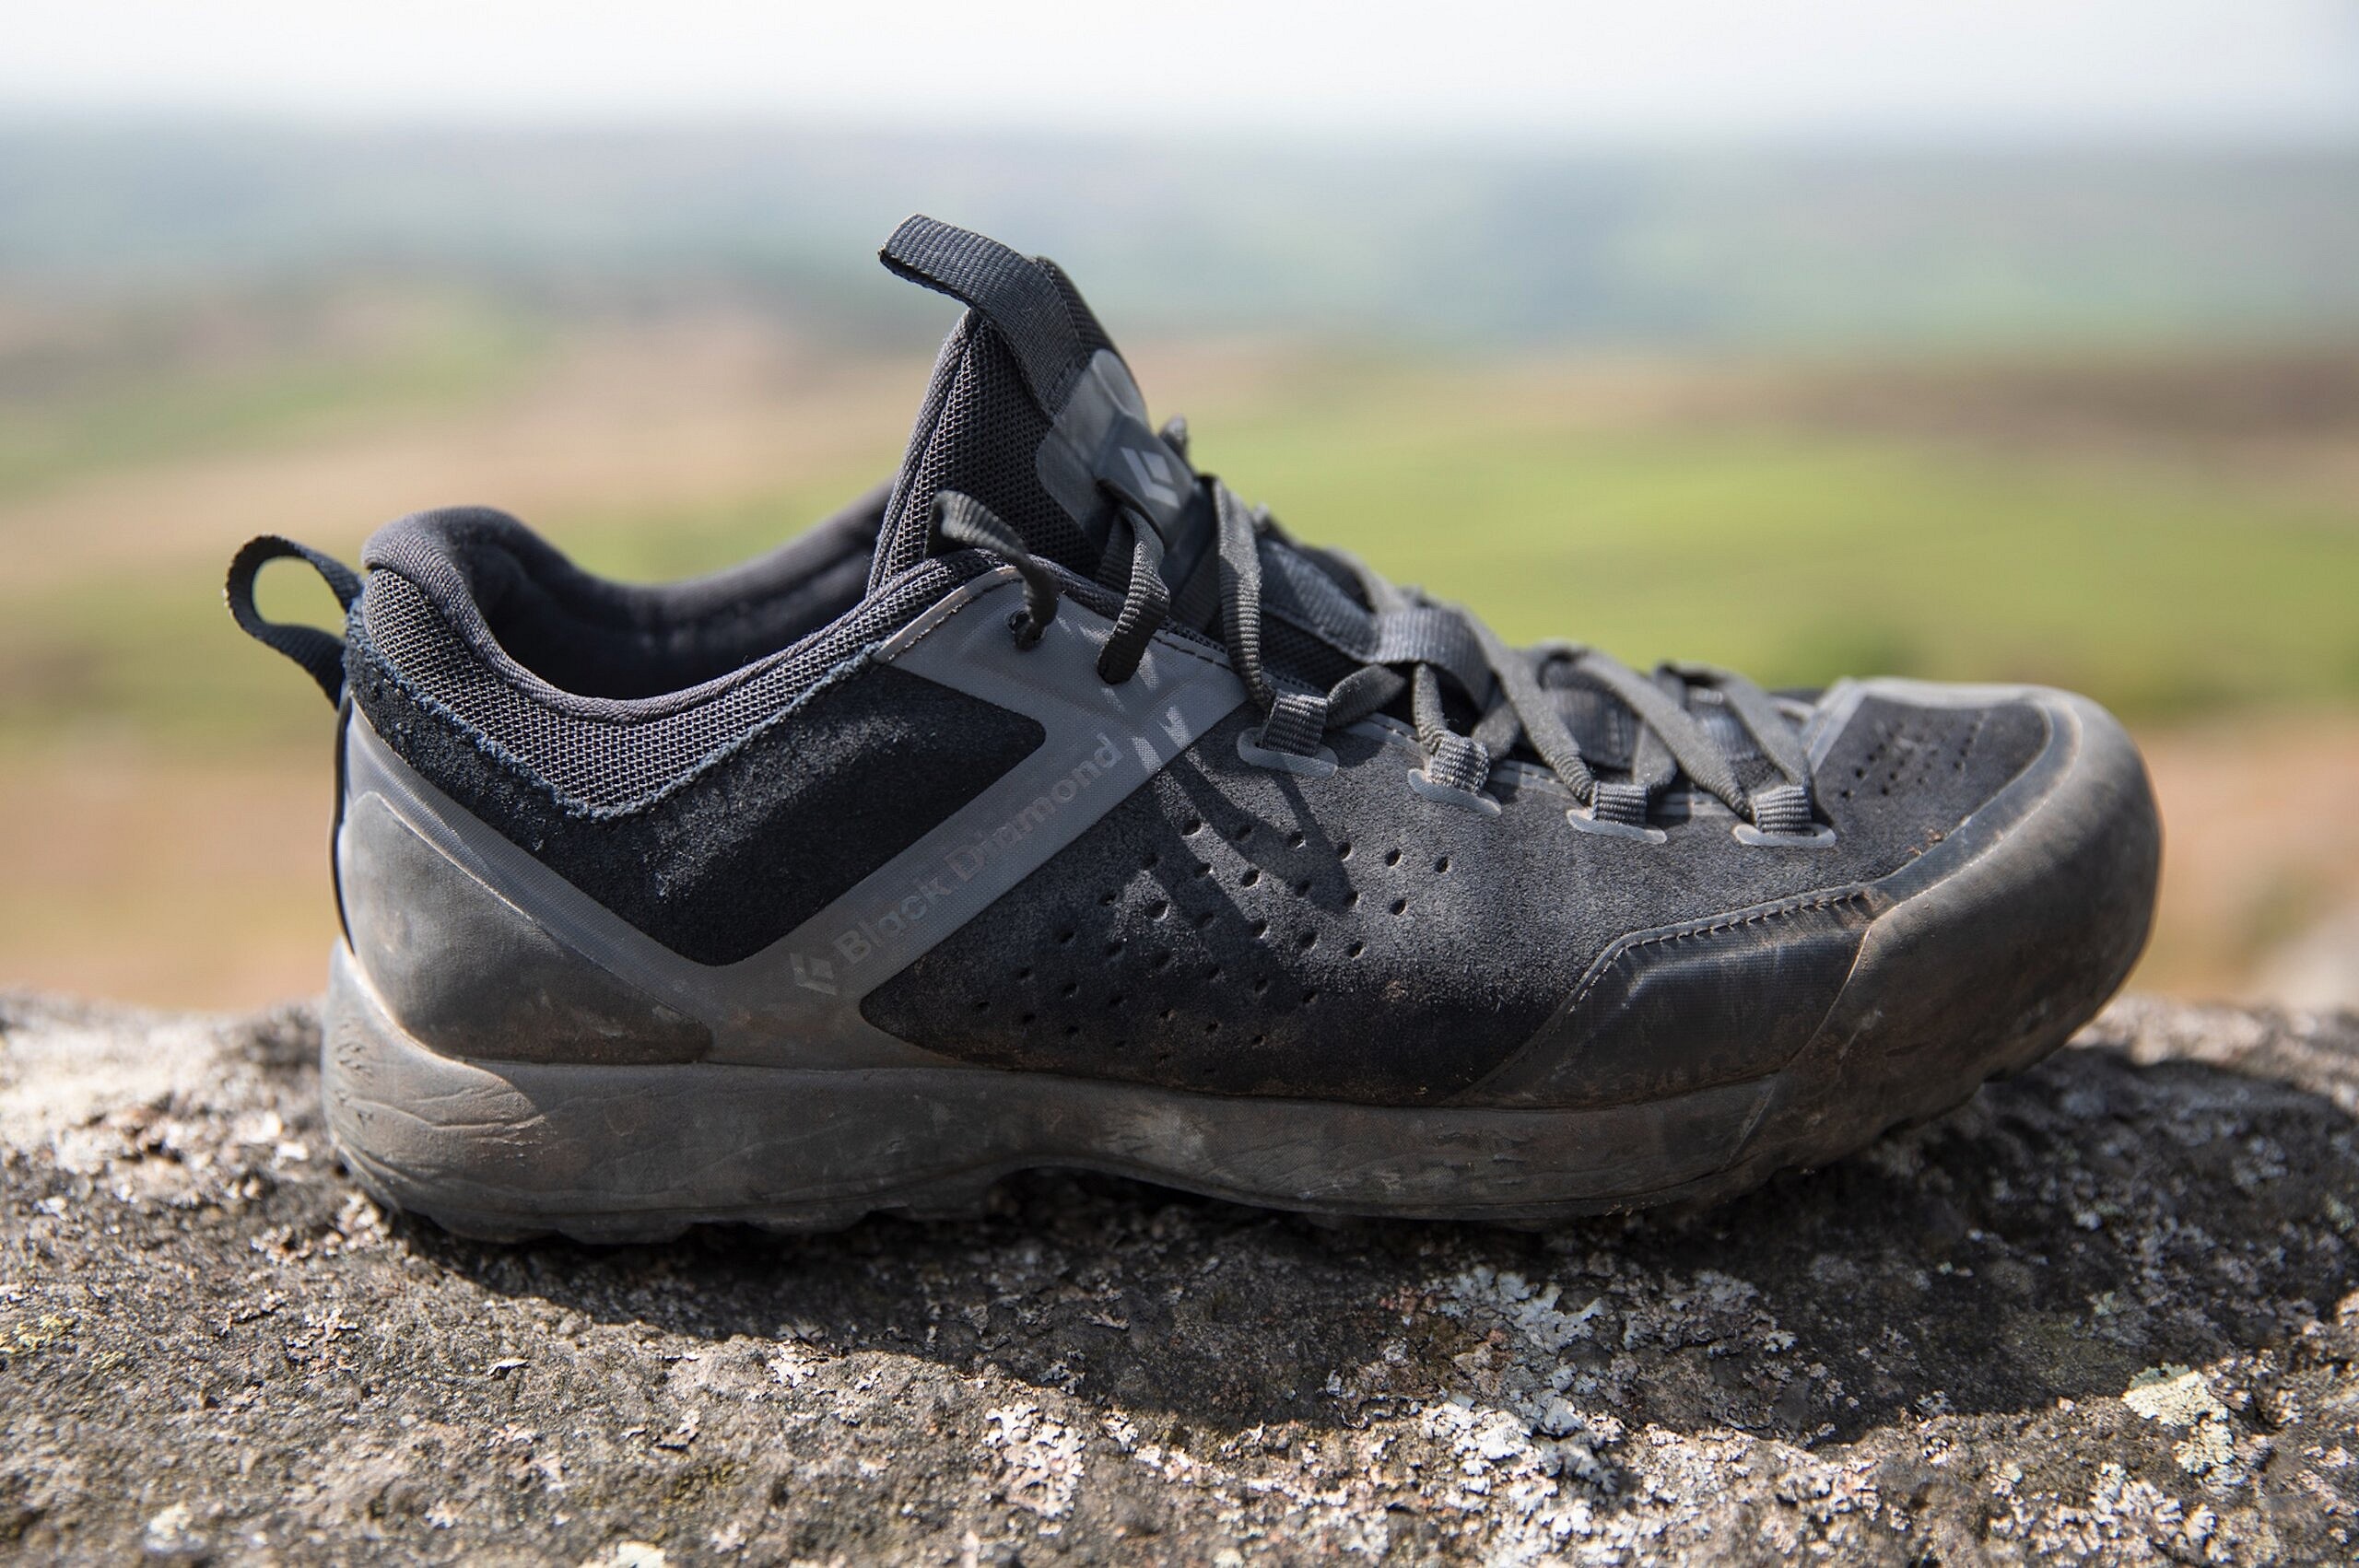 With its more featured sole the Mission XP is more suited to general use  © UKC Gear